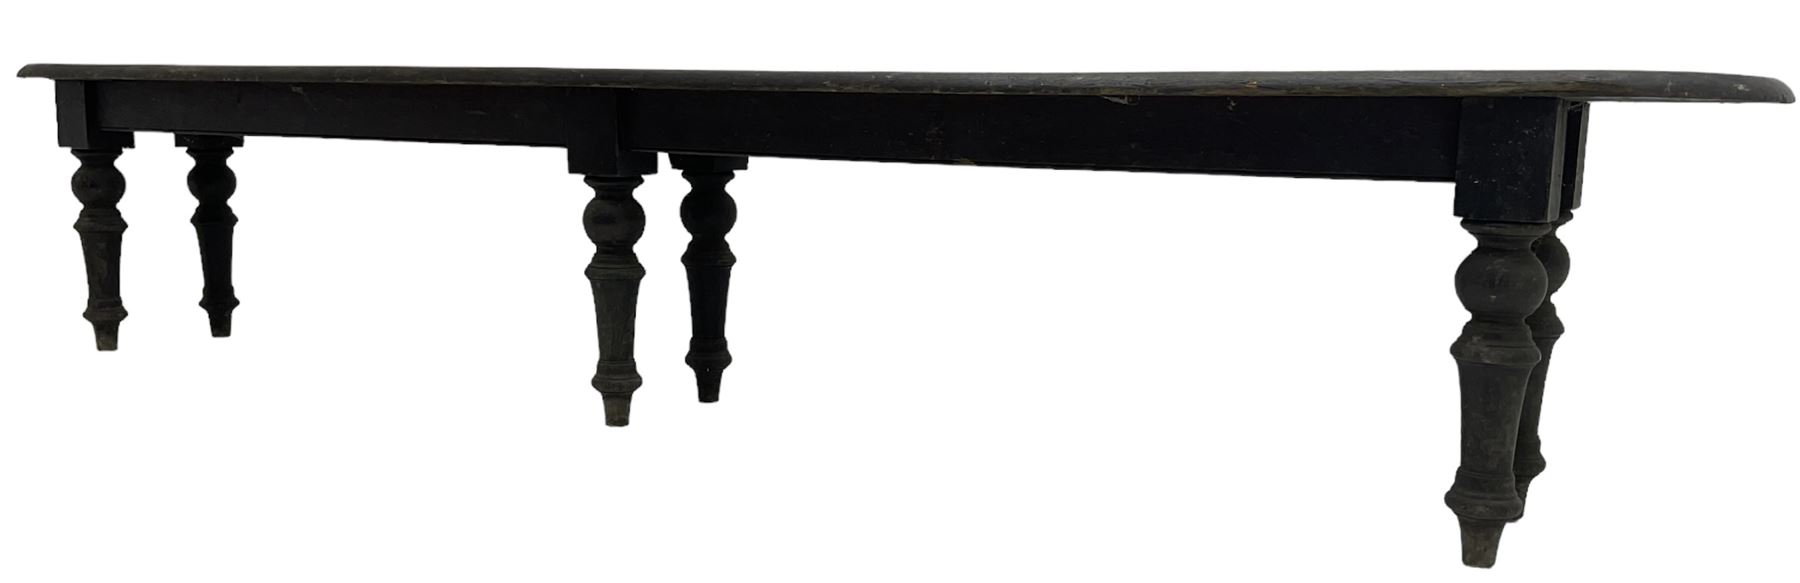 Large 19th century stained oak 9' hall bench - Image 2 of 8